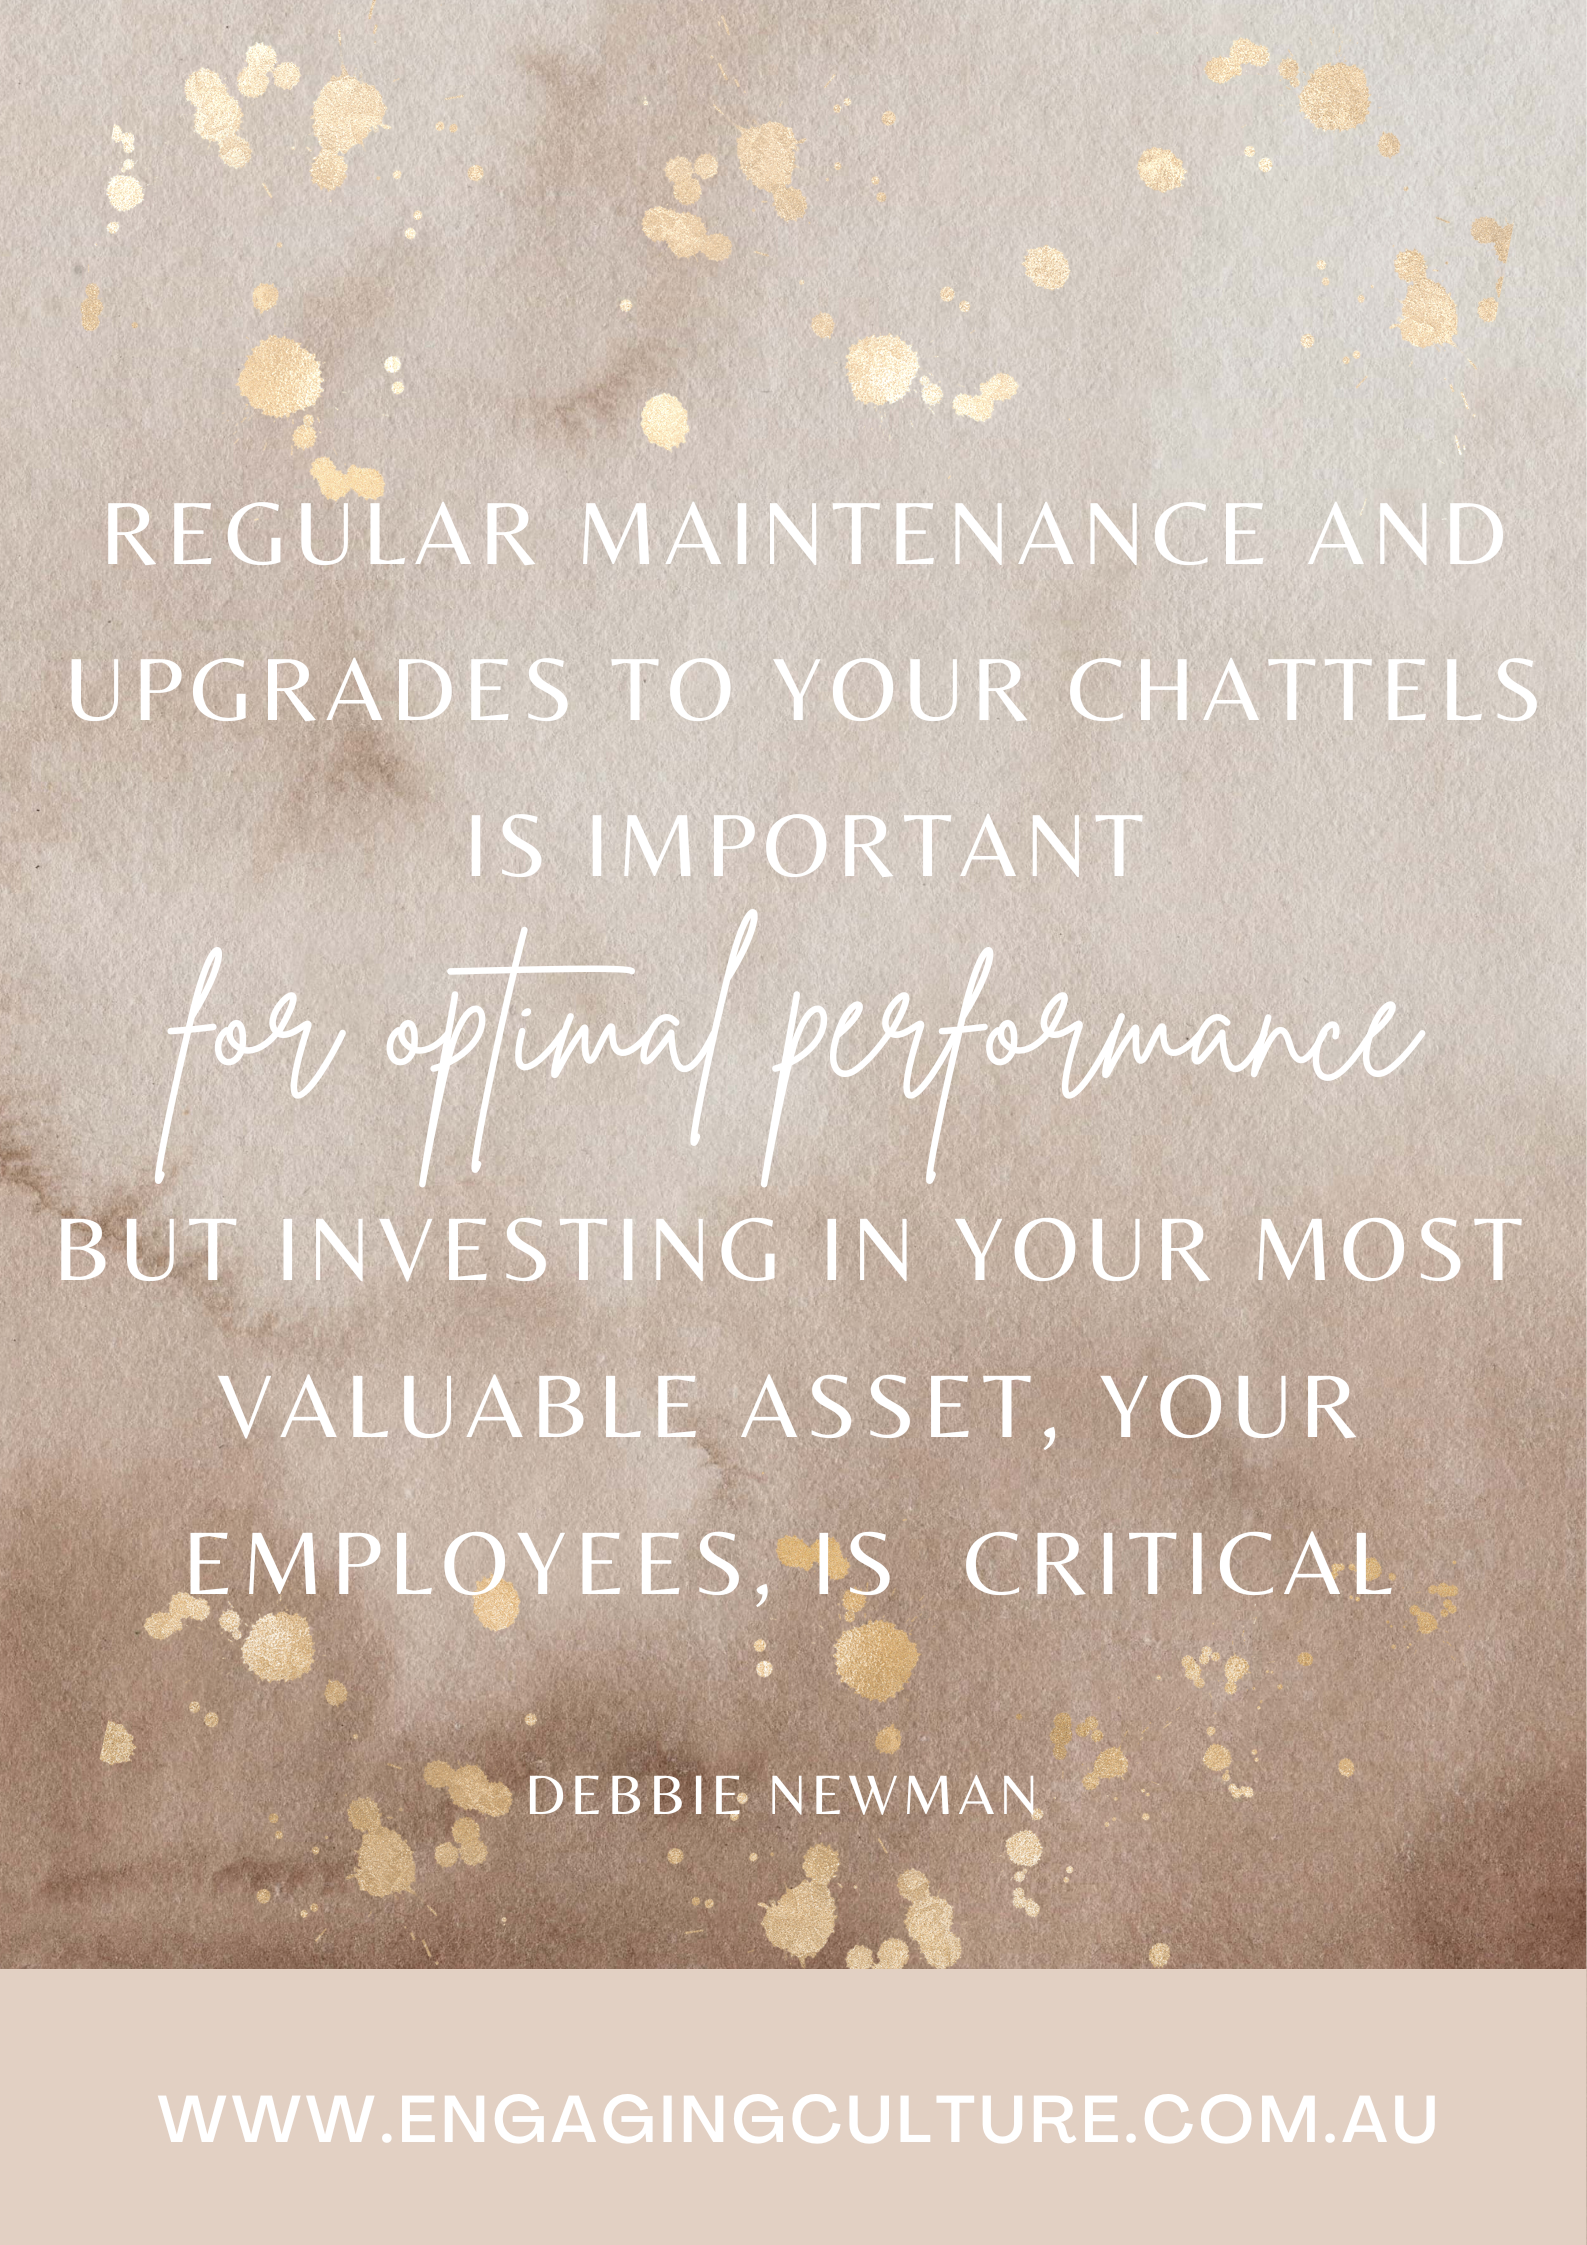 Regular maintenance and upgrades to your chattels is important for optimal performance but investing in your most valuable asset, your employees, is critical